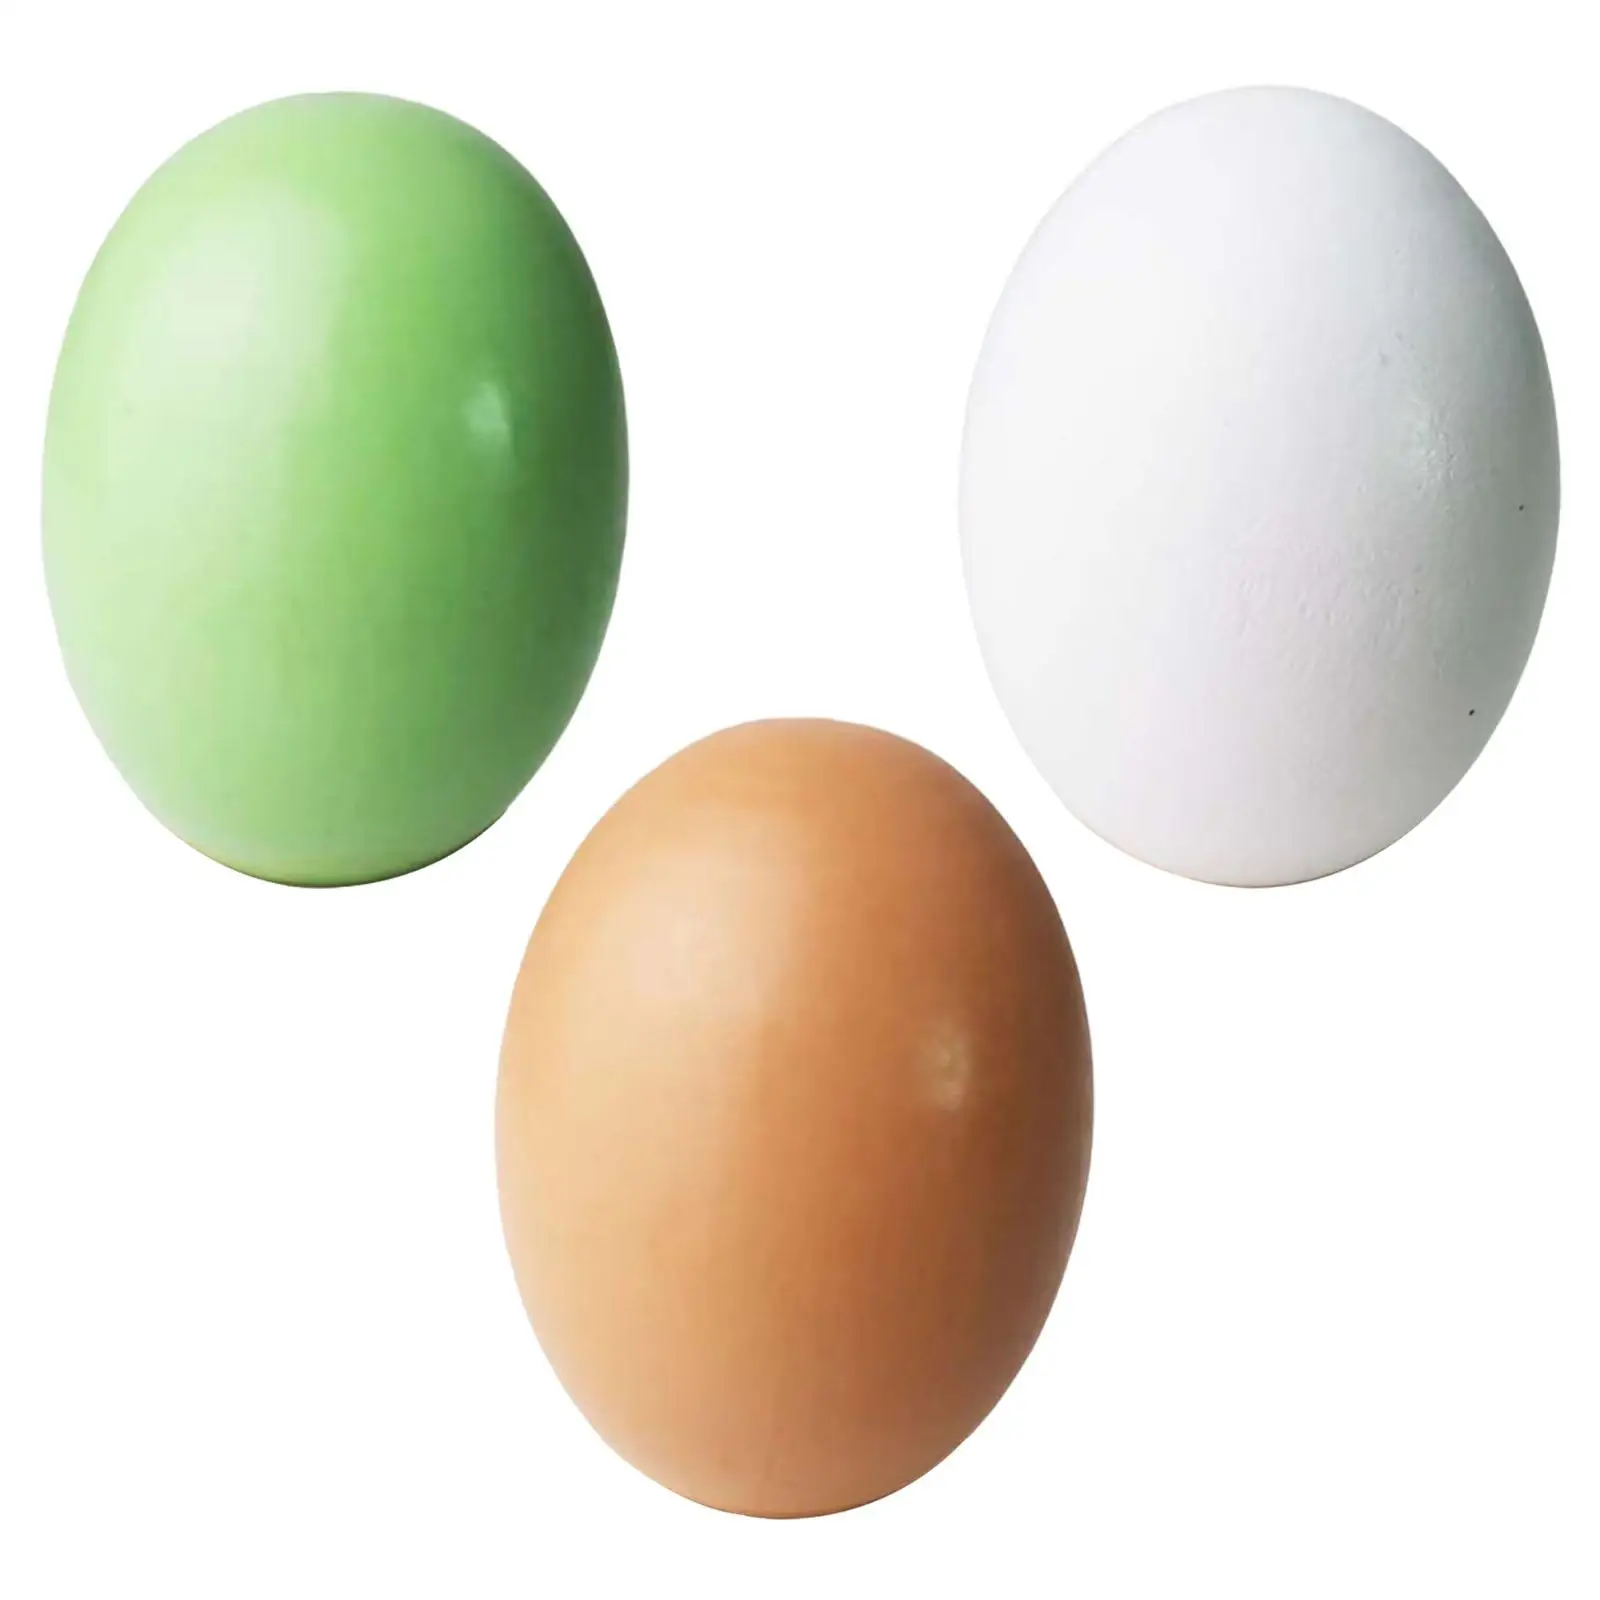 3x Wooden Simulation Eggs Developmental Toy Pretend Toy for Themed Parties Boys